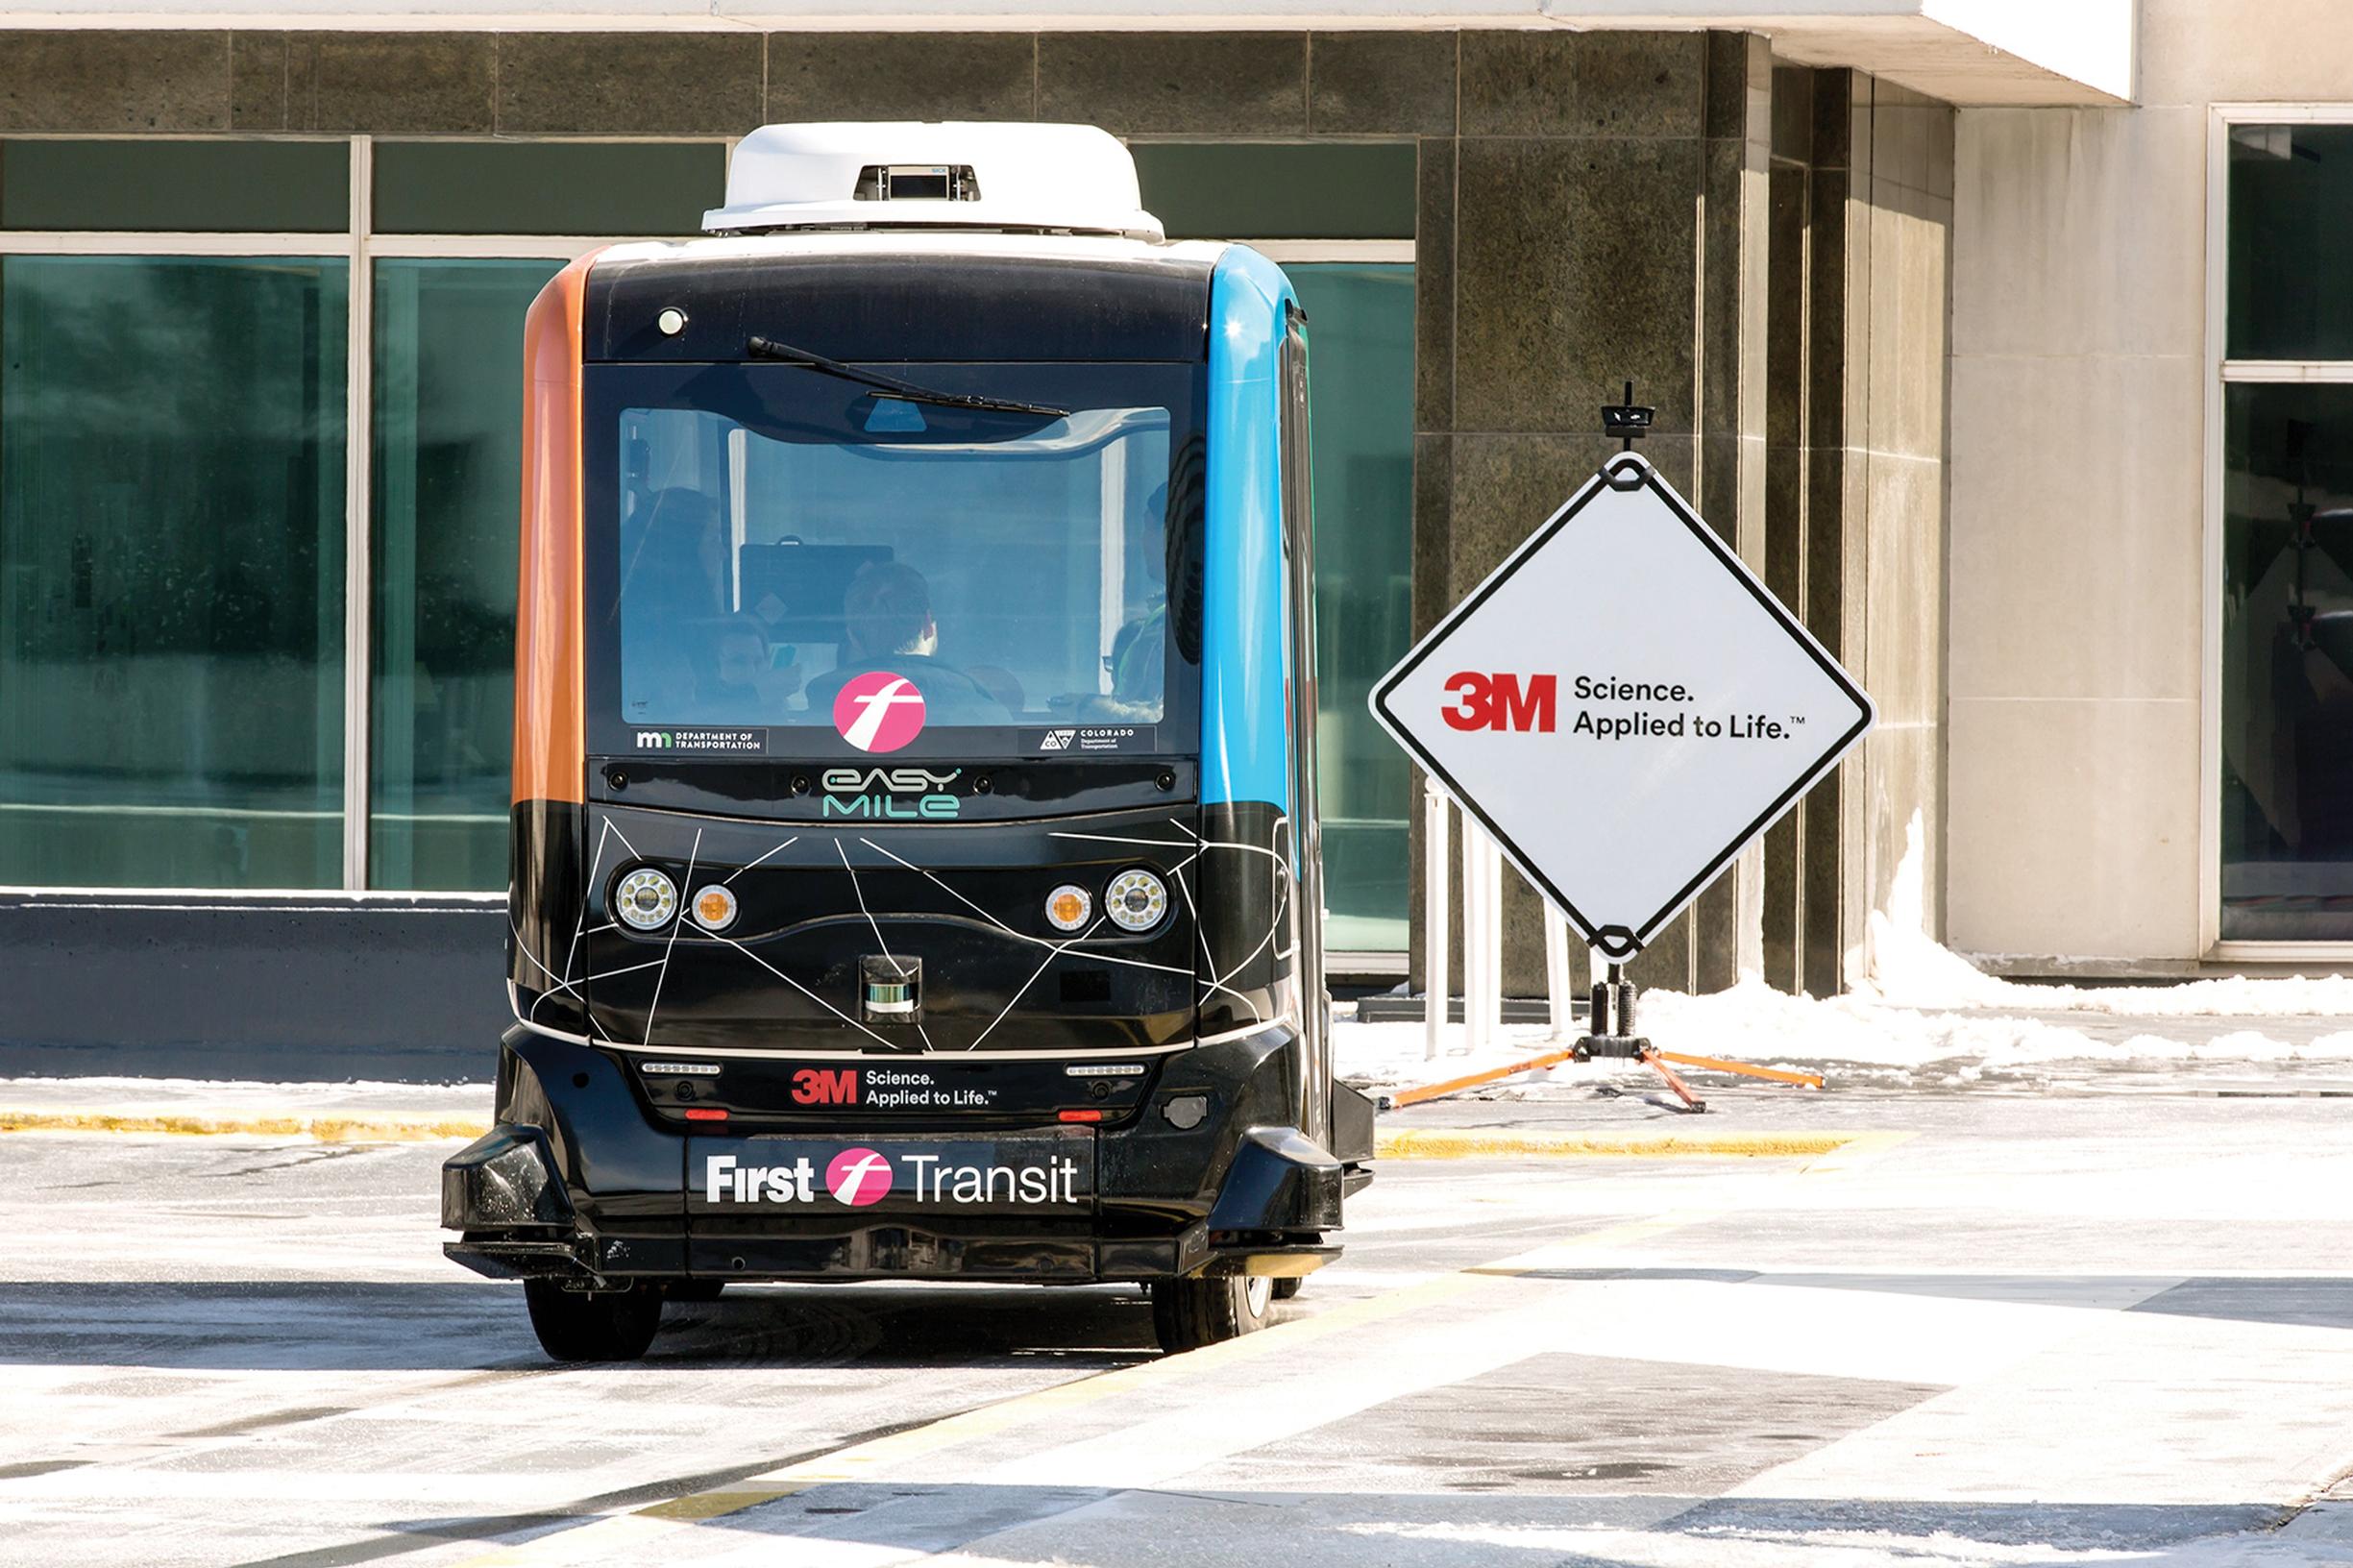 FirstGroup has been trialling autonomous vehicles in the US. The Oxfordshire trial is likely to feature similar vehicles